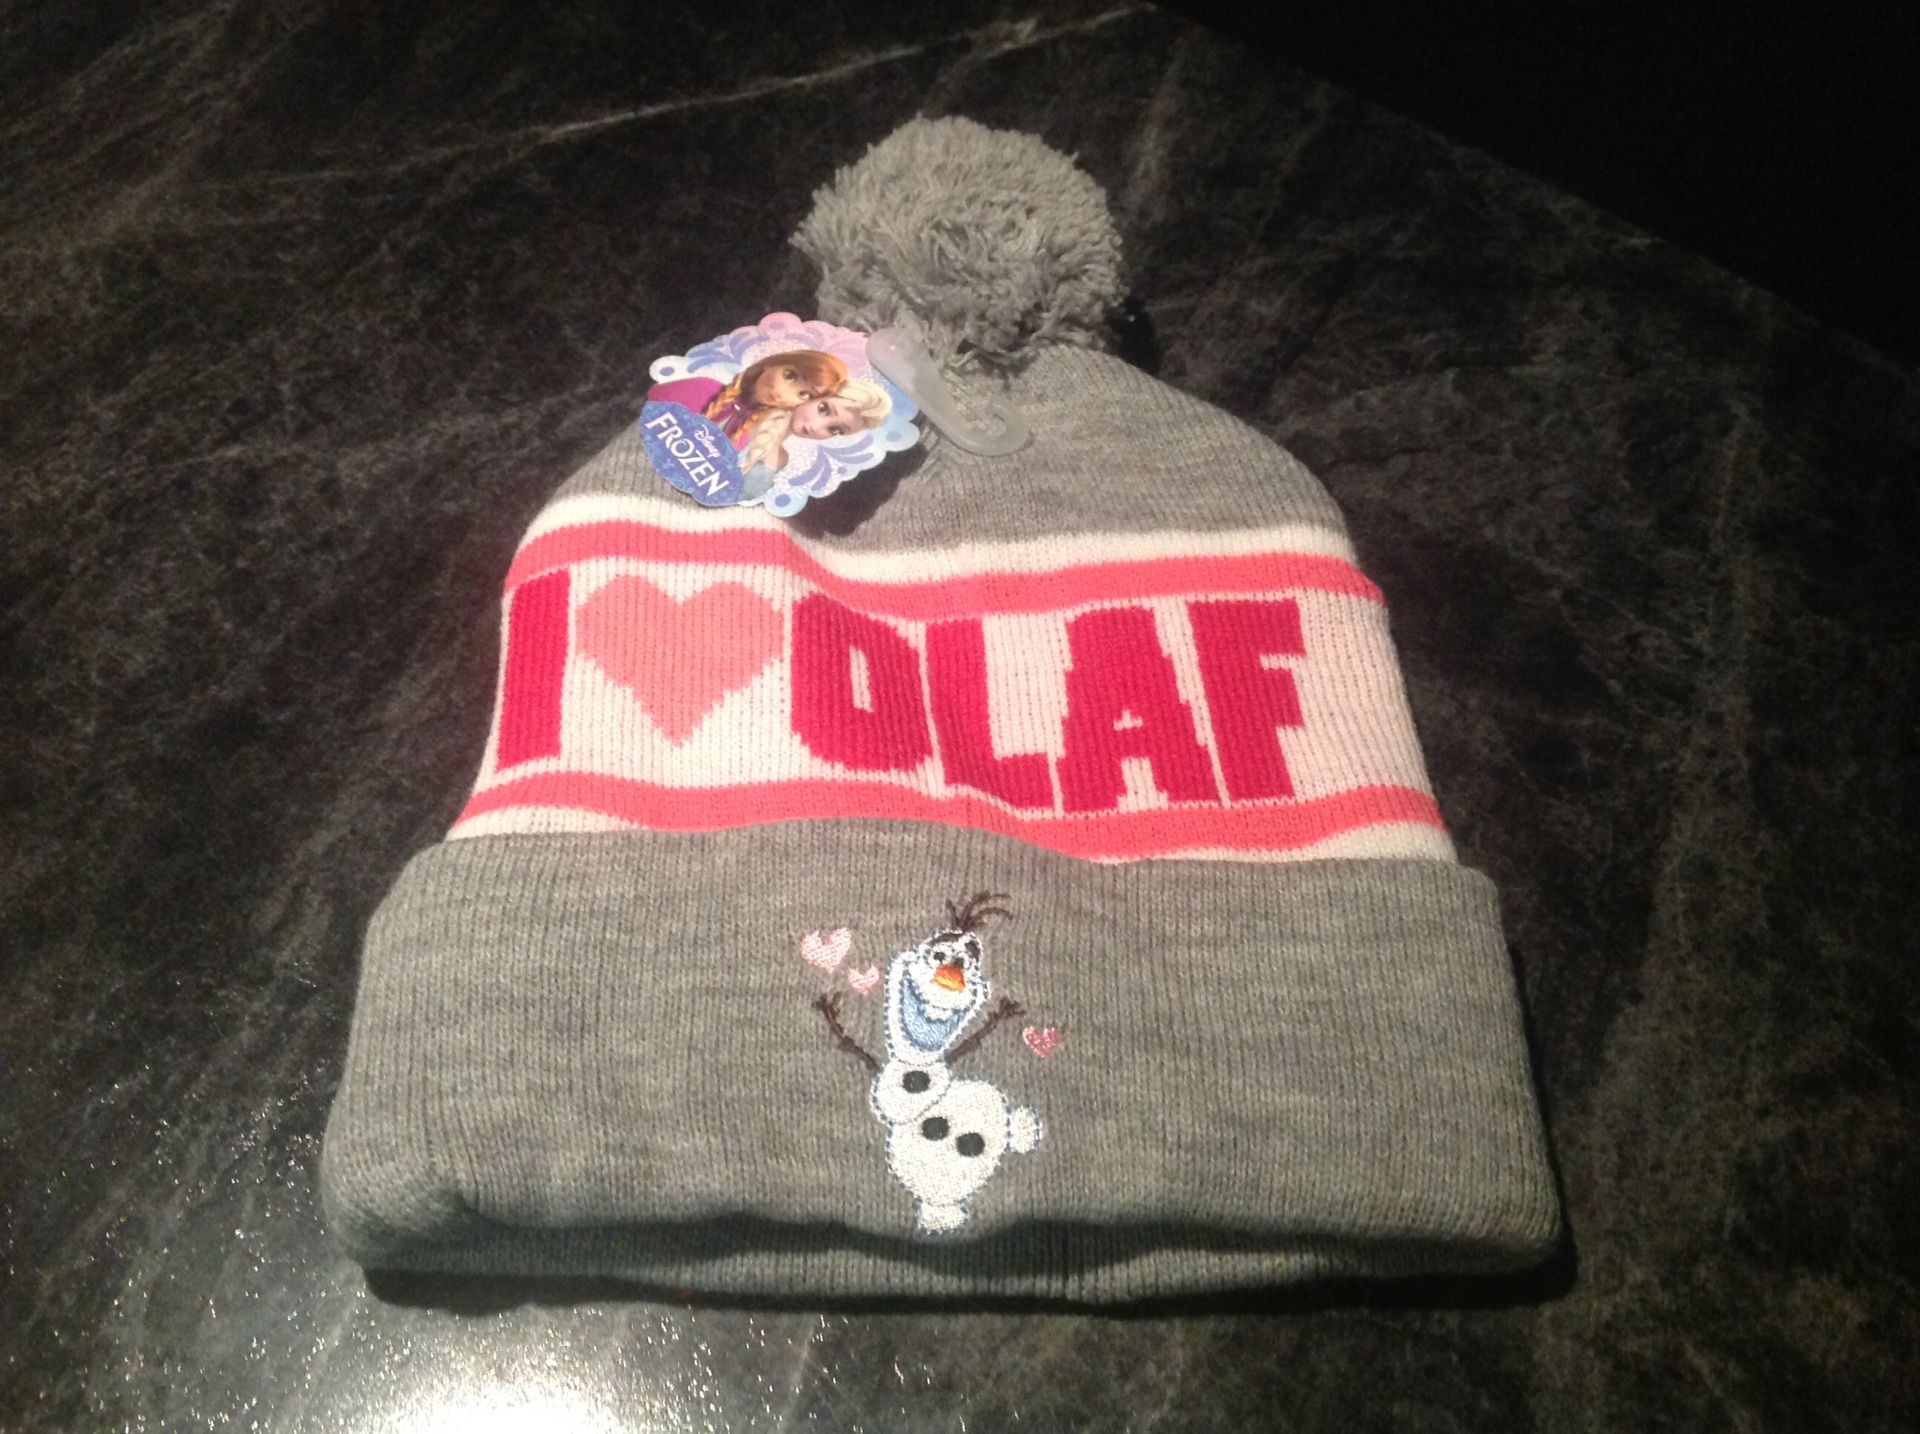 Disney's Frozen I ❤️ Olaf, Embroidered Gray,White,Pink & Red Knit Beanie With Pom Pom Brand New With Tags